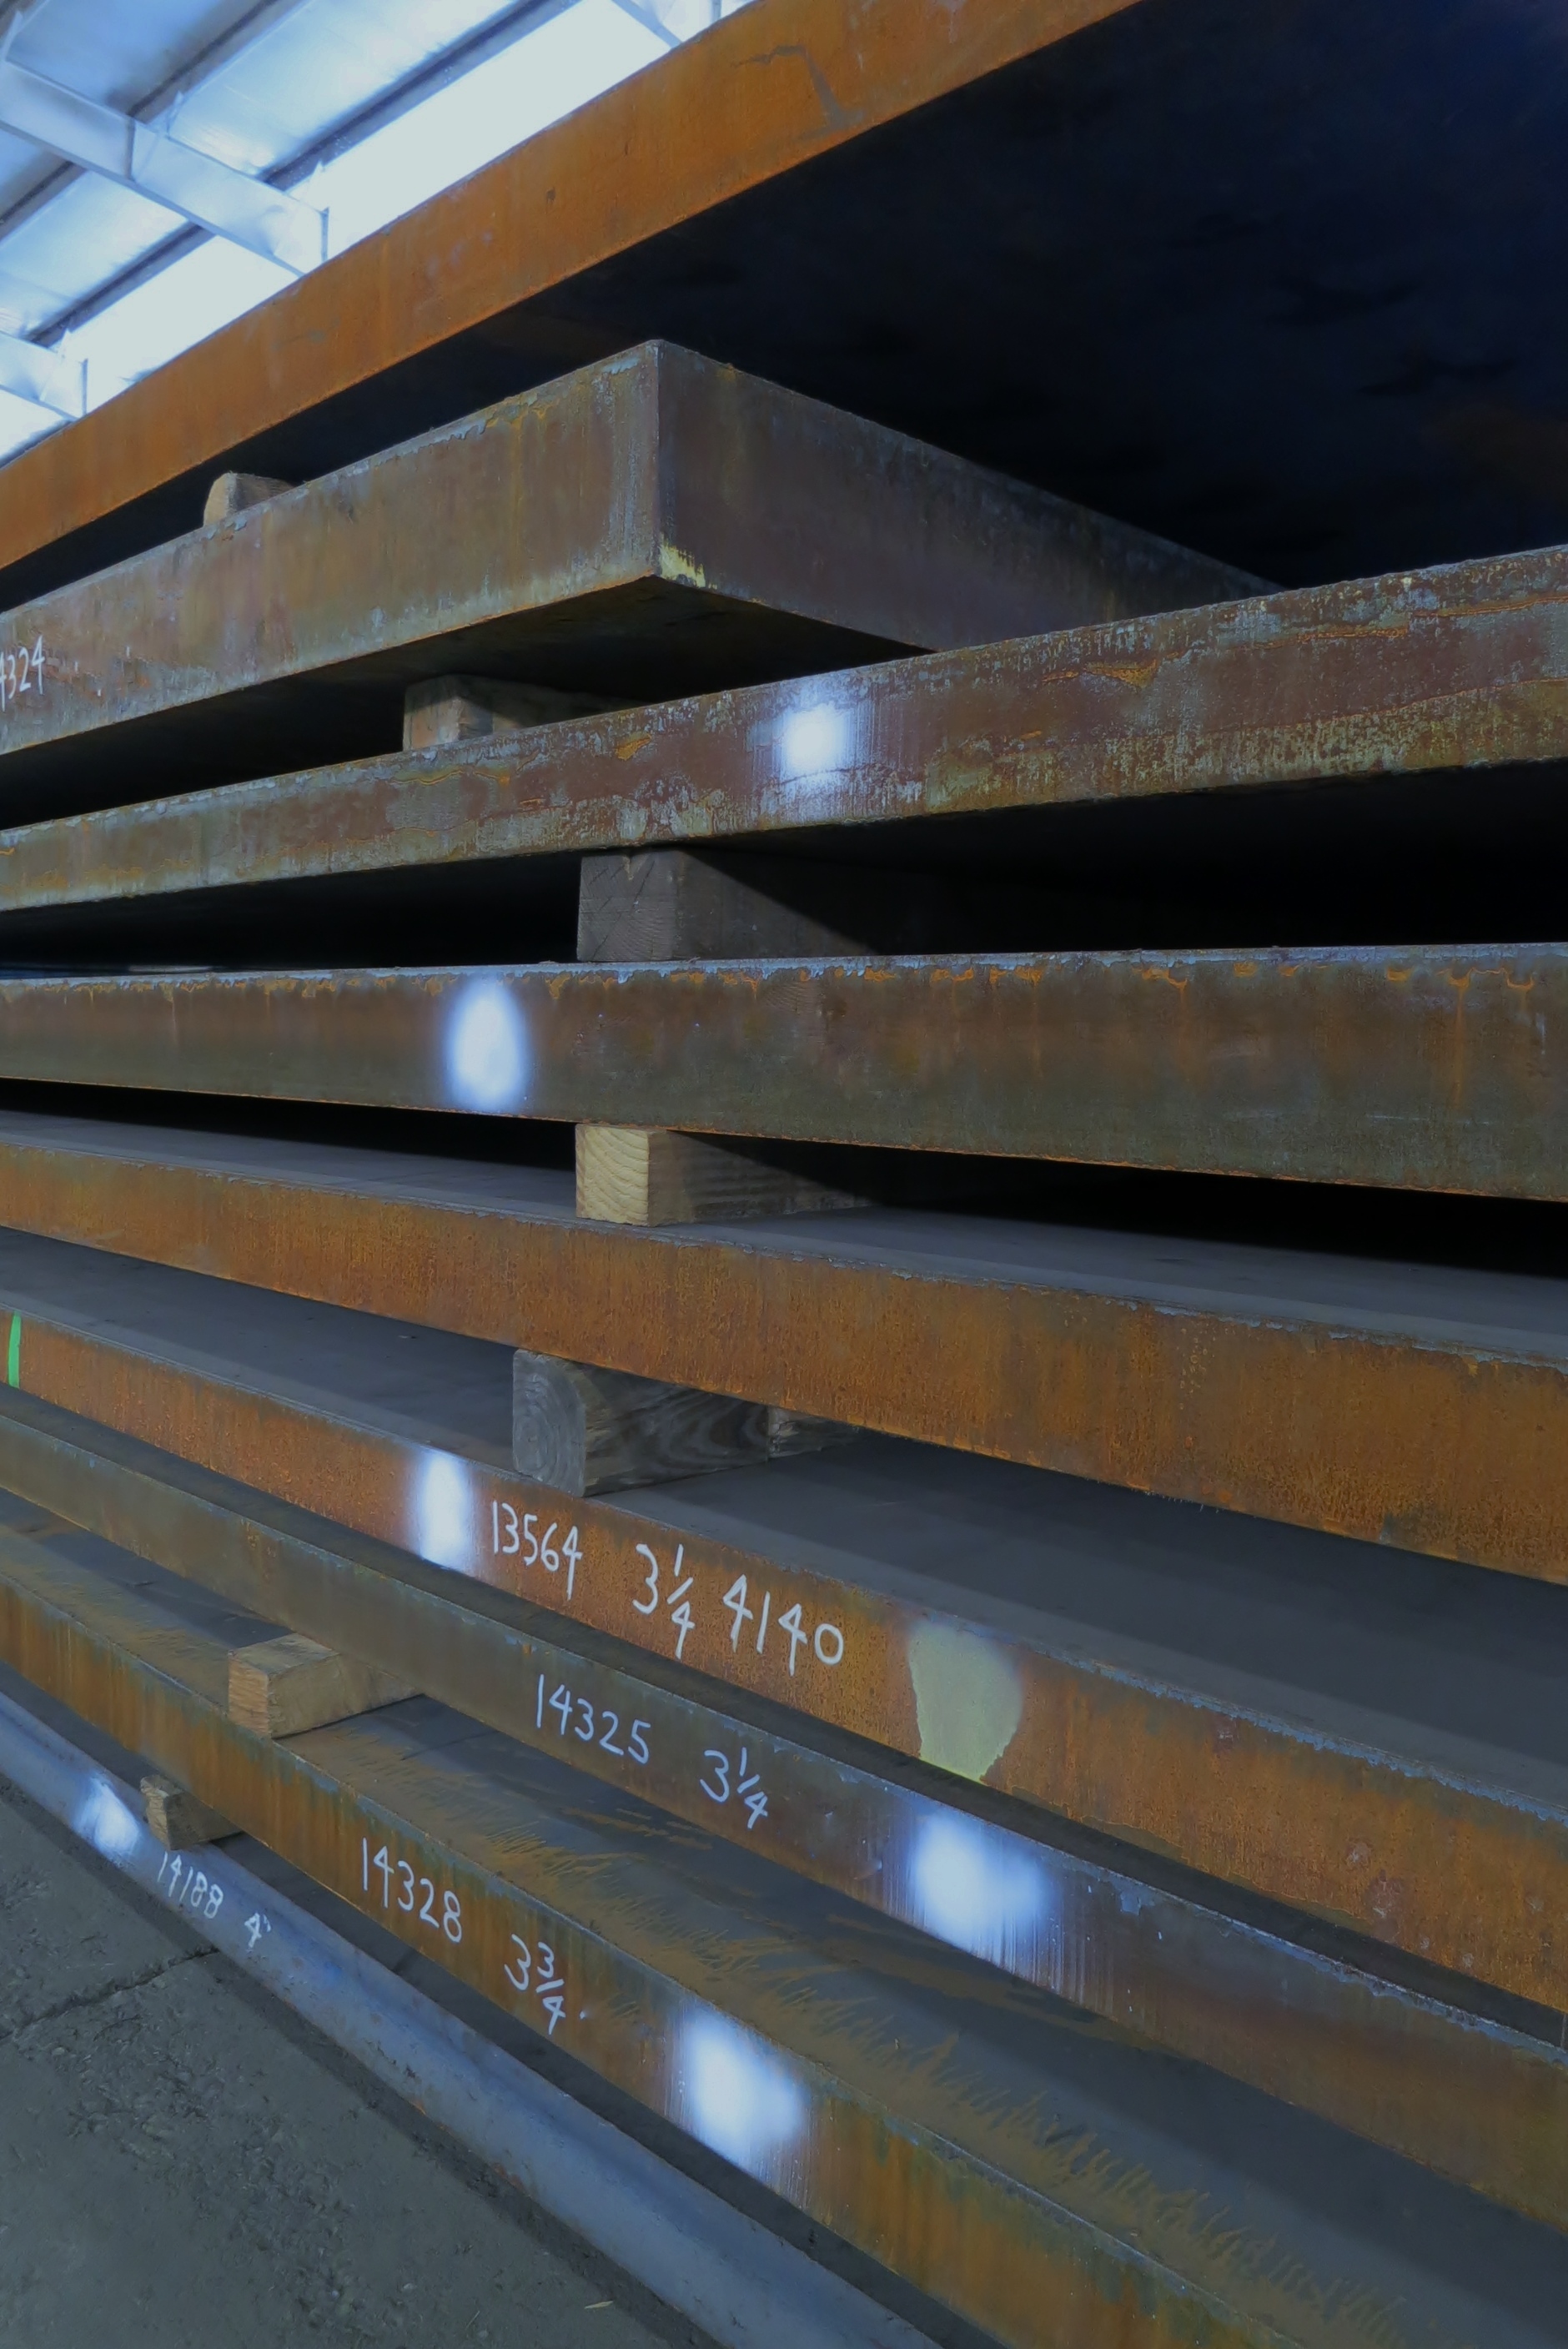 Oversized Tolerance 3/16 Thickness Annealed Precision Ground Small Parts-56958 O1 Tool Steel Sheet 1/2 Width 18 Length